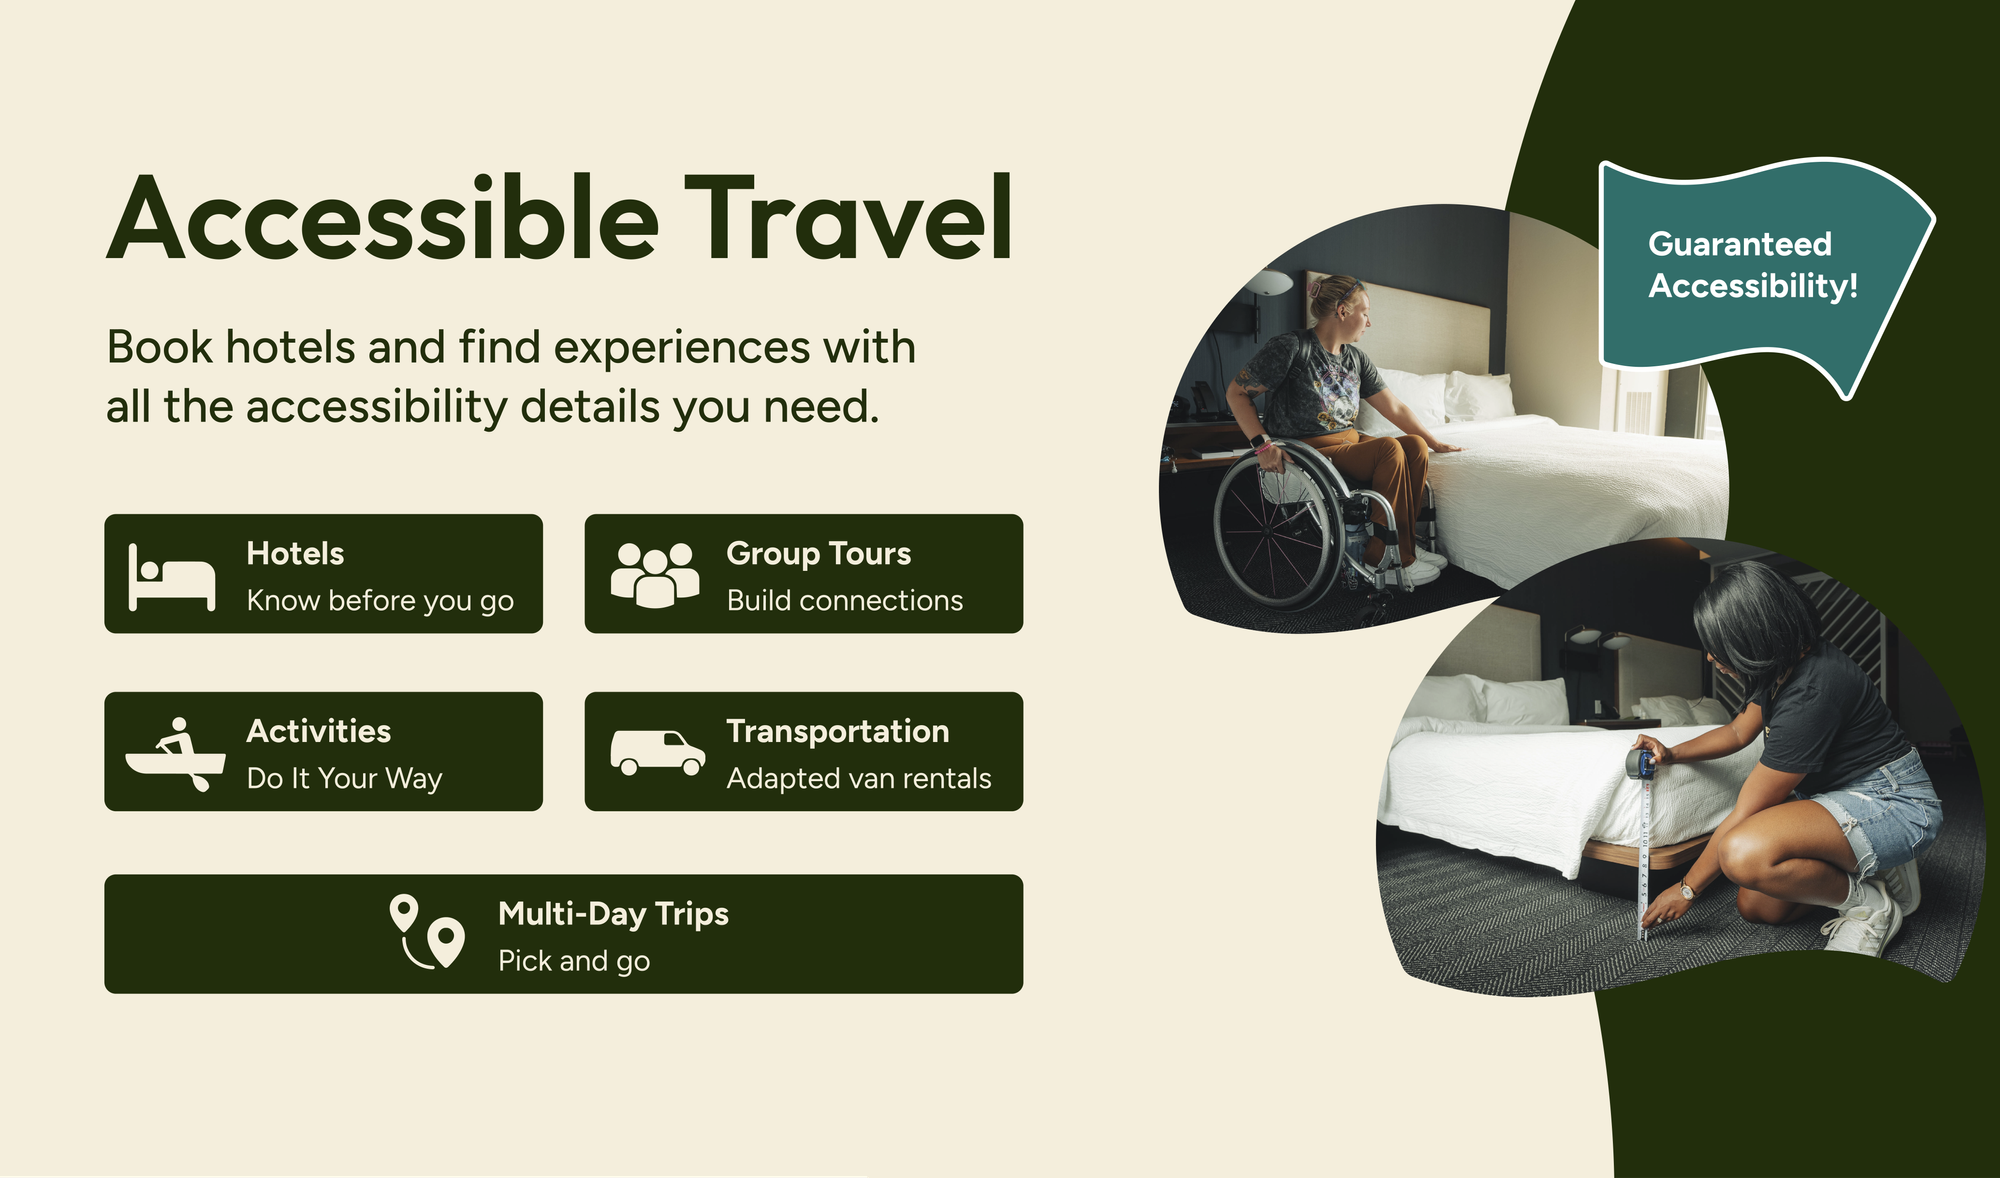 Book with Wheel the World for accurate and reliable information on accessibility